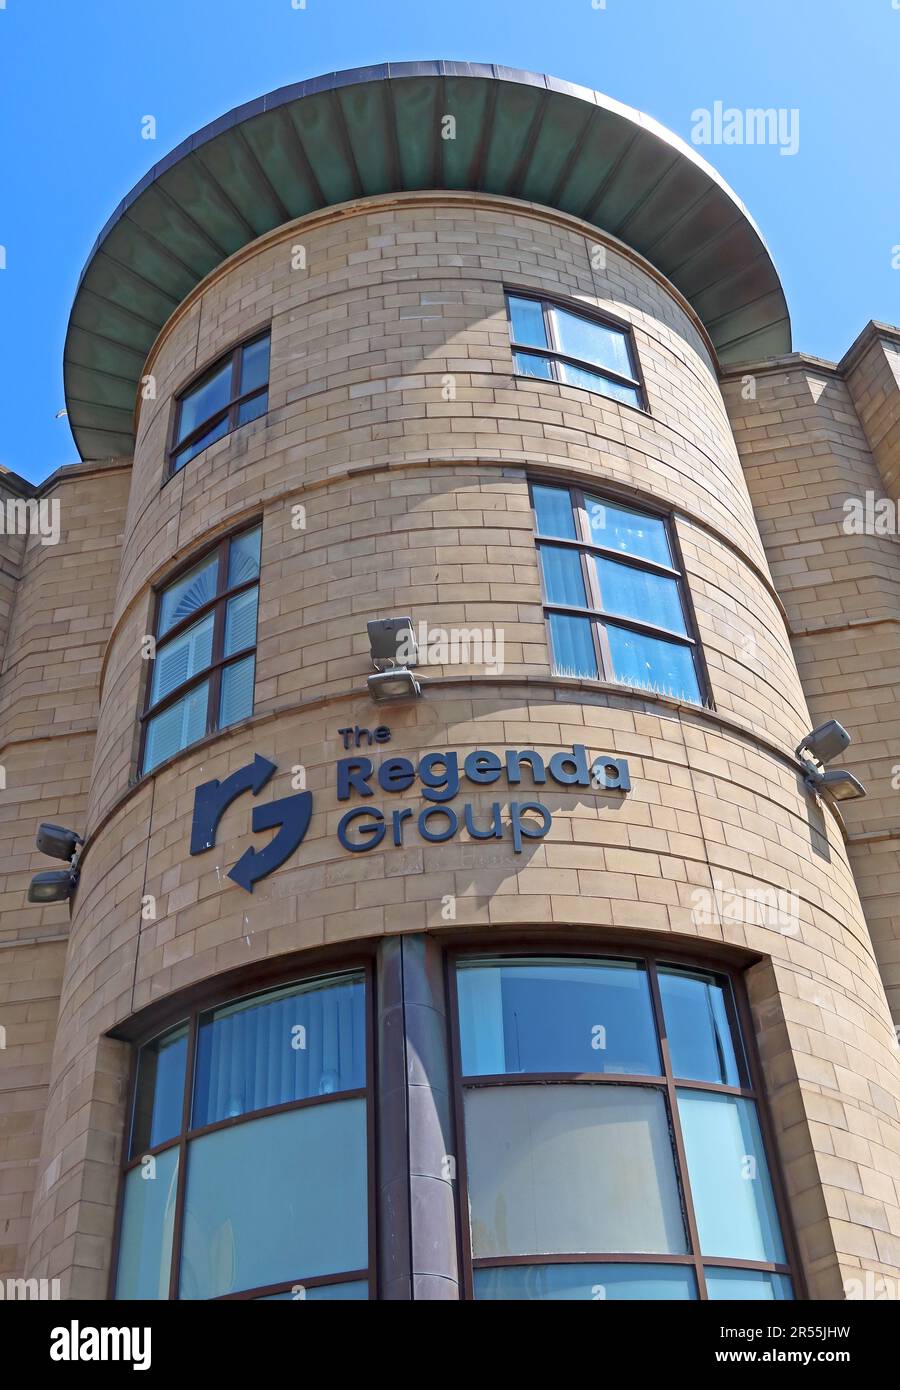 Regenda Housing Group, Commtation Plaza, 1 Commtation Row, Liverpool, Merseyside, L3 8QF Banque D'Images